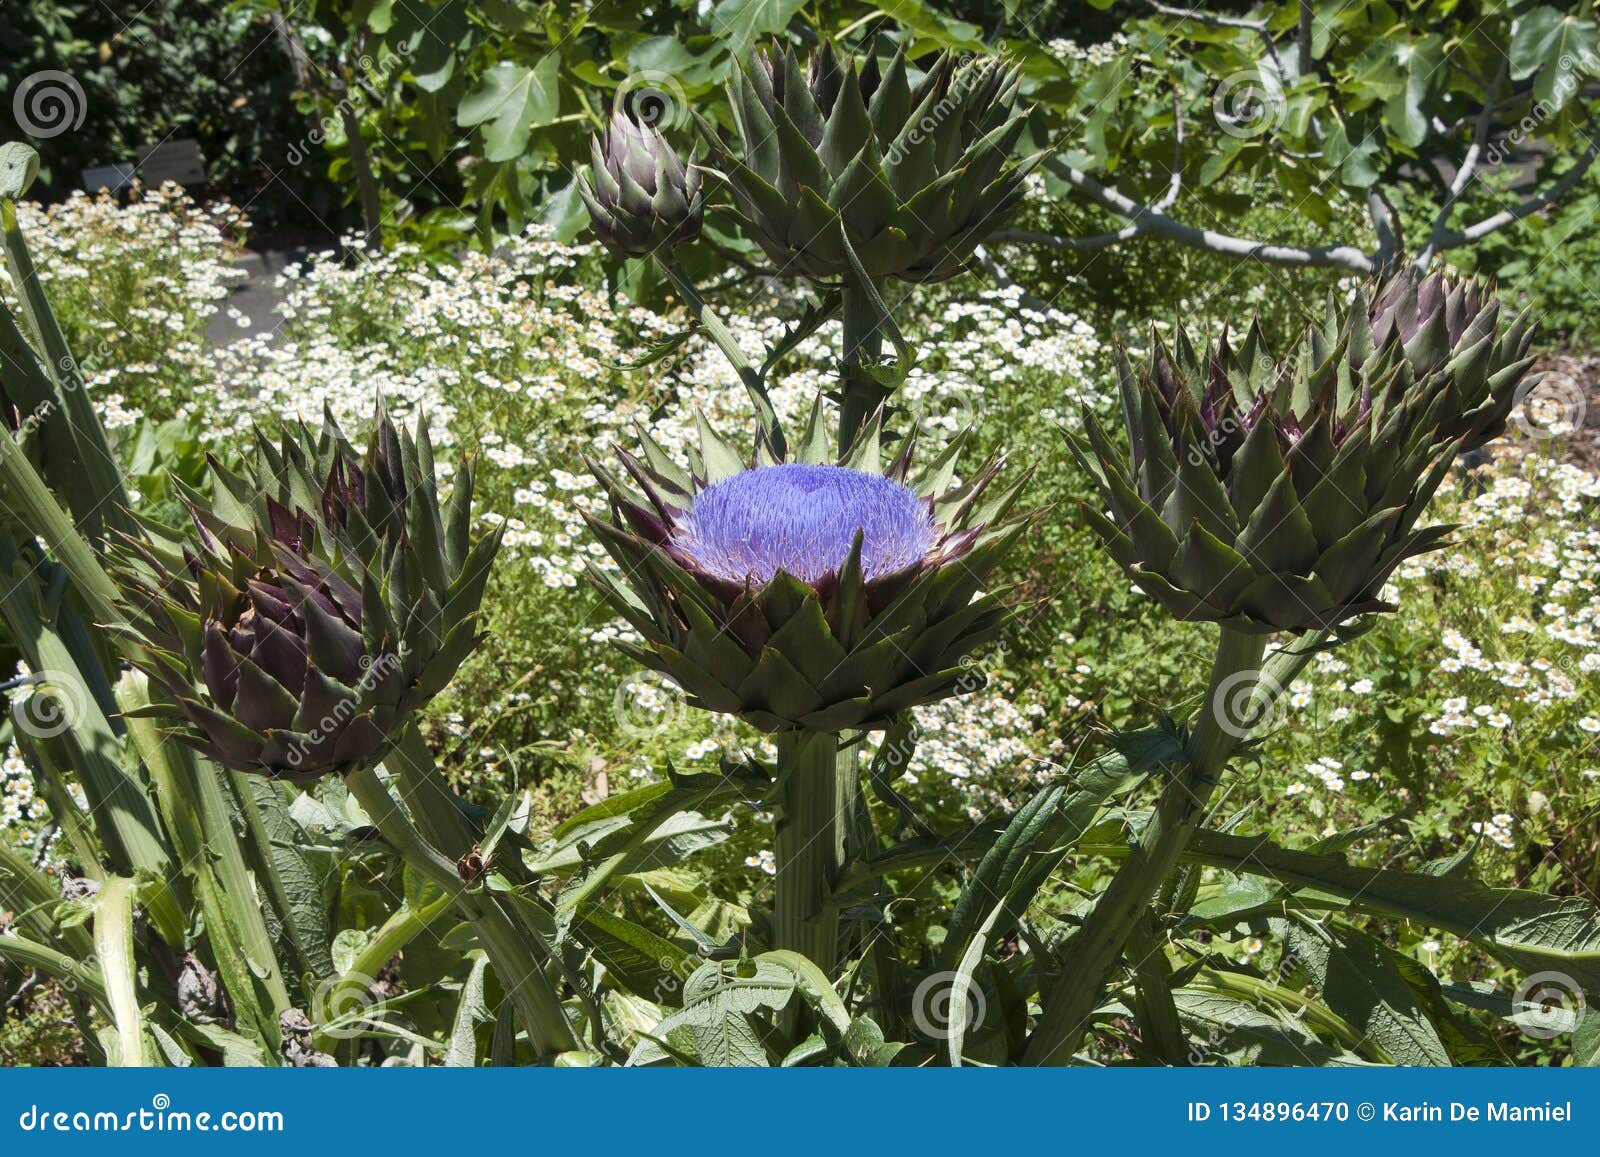 Globe Artichoke Plant with Flower Heads and Fruit in Garden Photo - Image of flower, fresh: 134896470